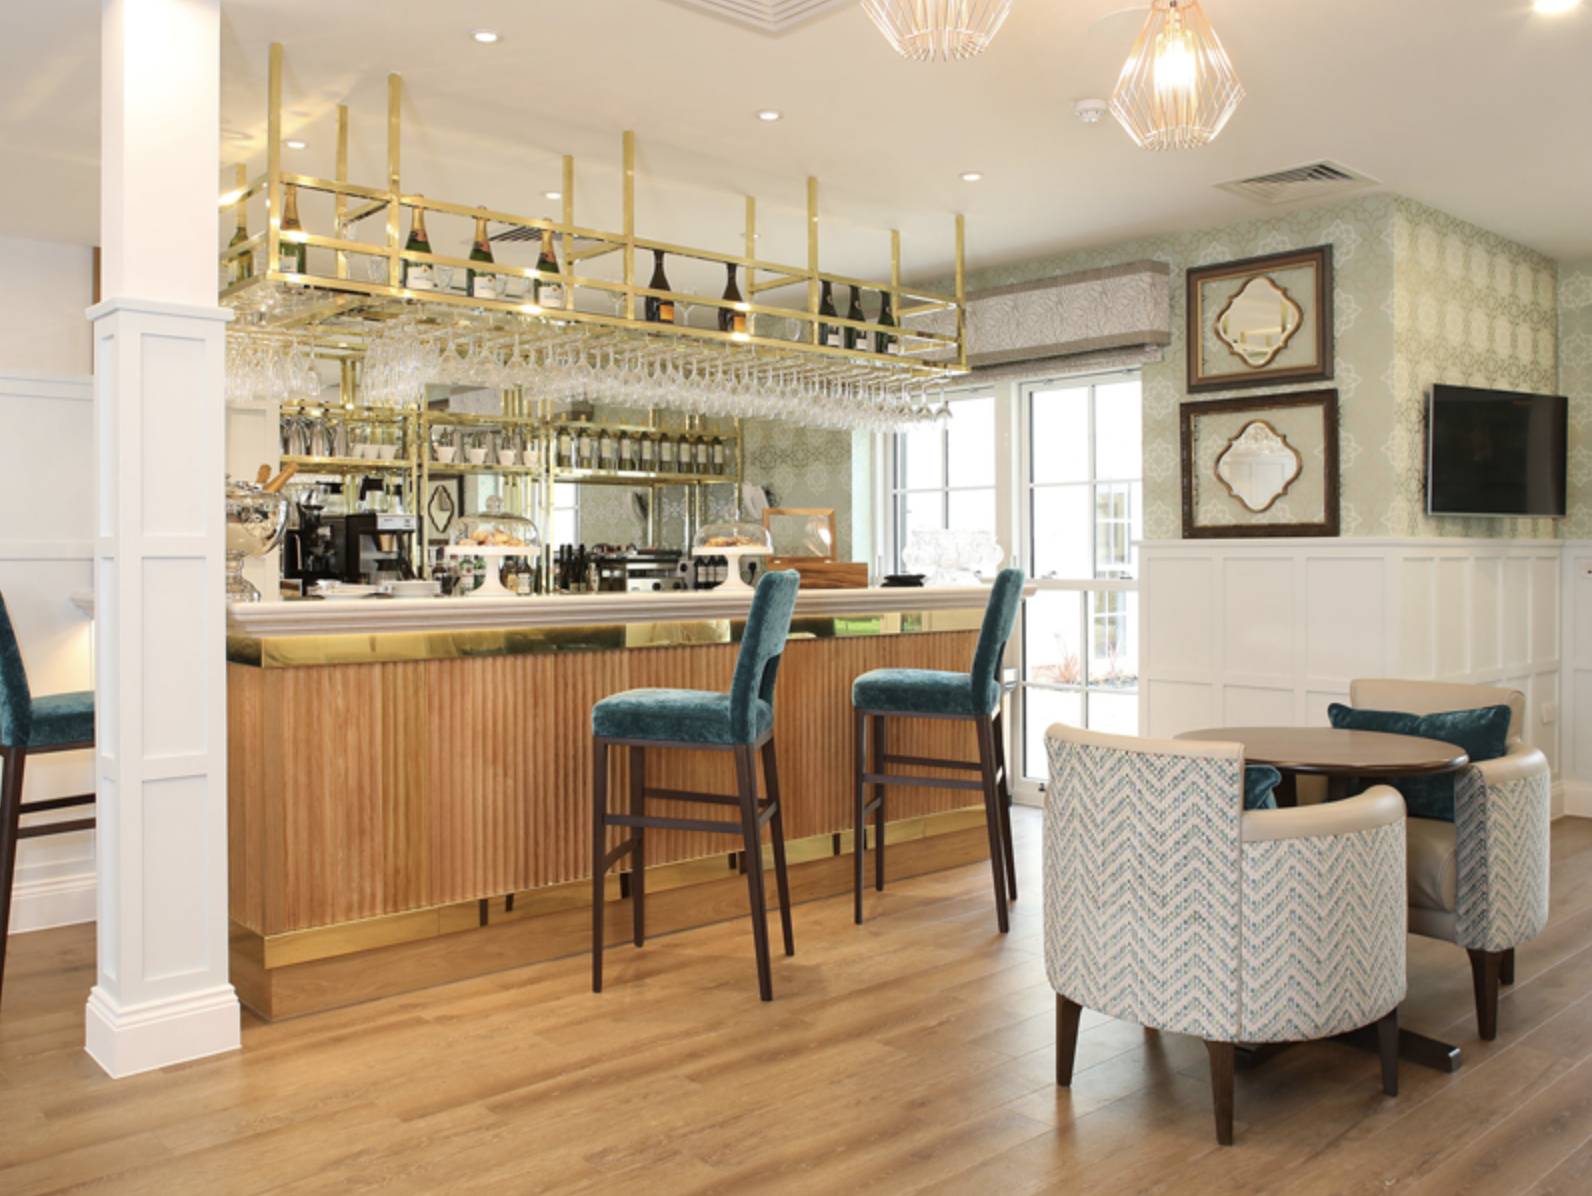 Bar and Bistro of Jubilee House care home in Leamington Spa, West Midlands